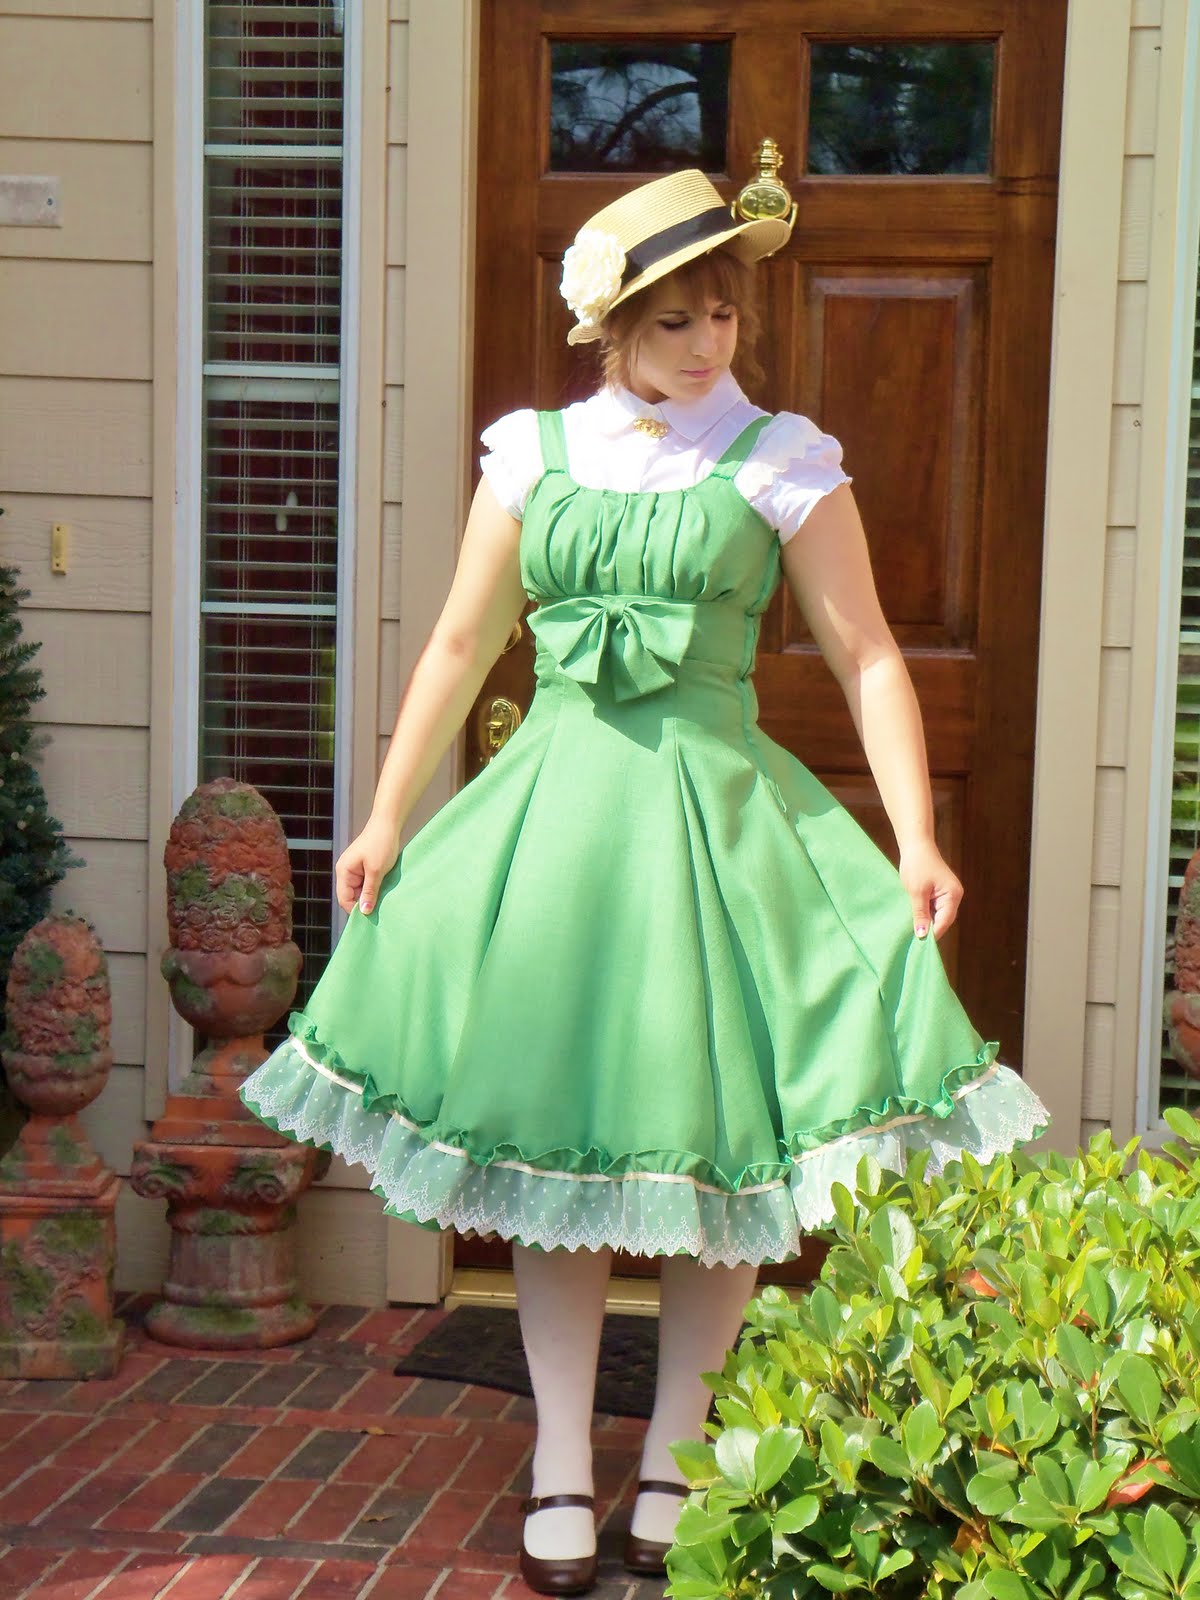 Lady Liddy Easter Dress Project Completed!